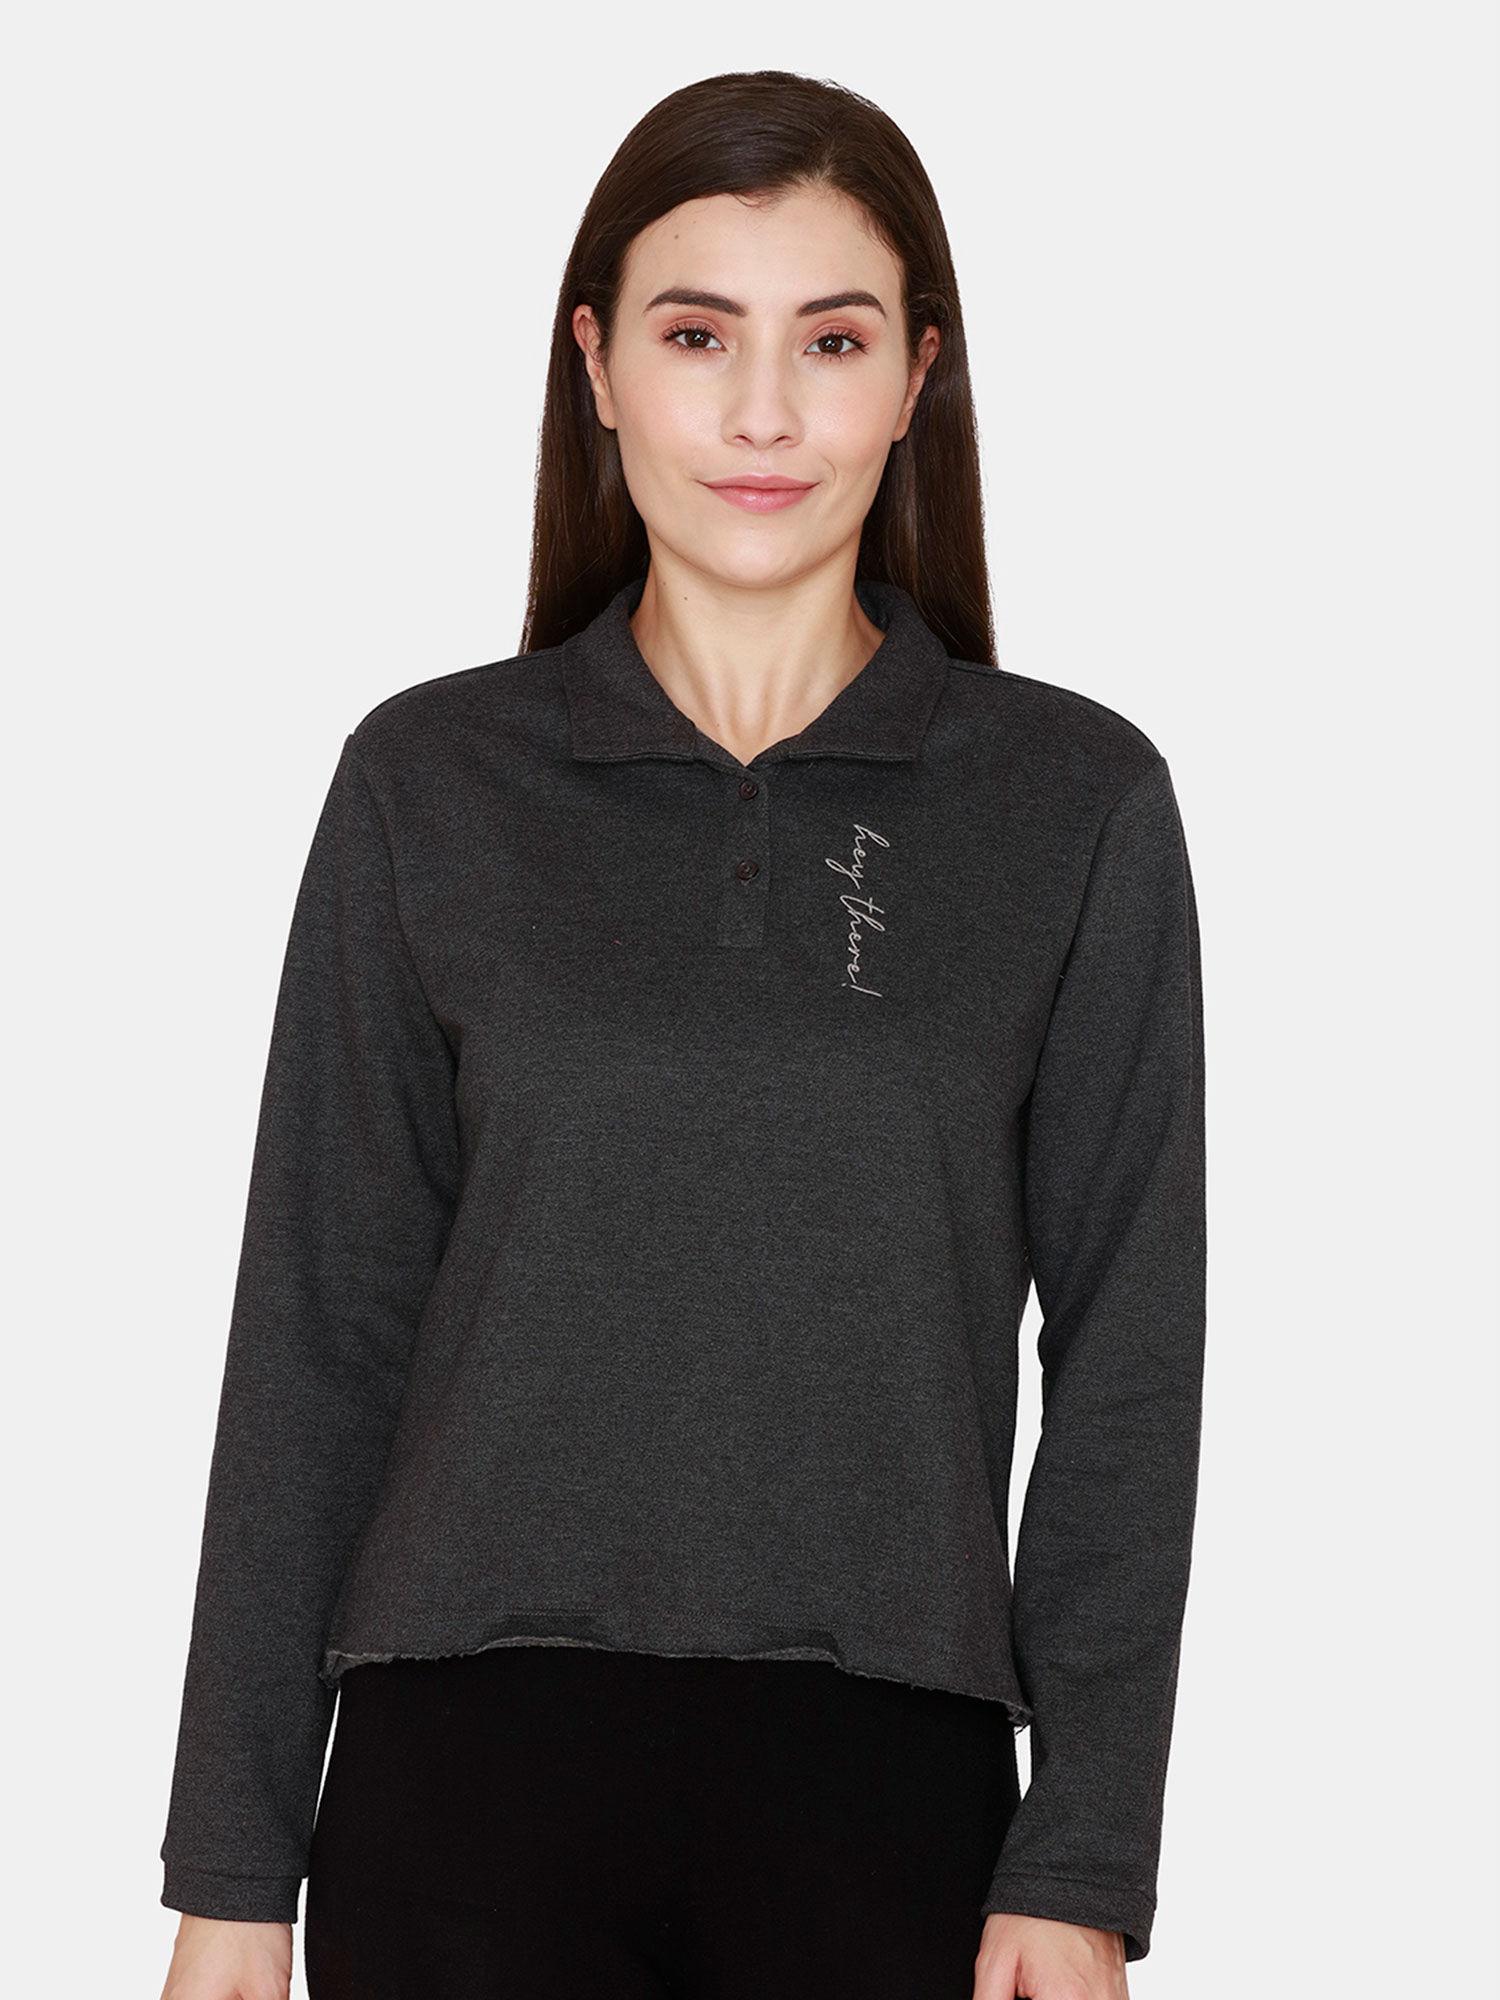 fleece marl knit cotton sweatshirt with soft brushed back - anthracite